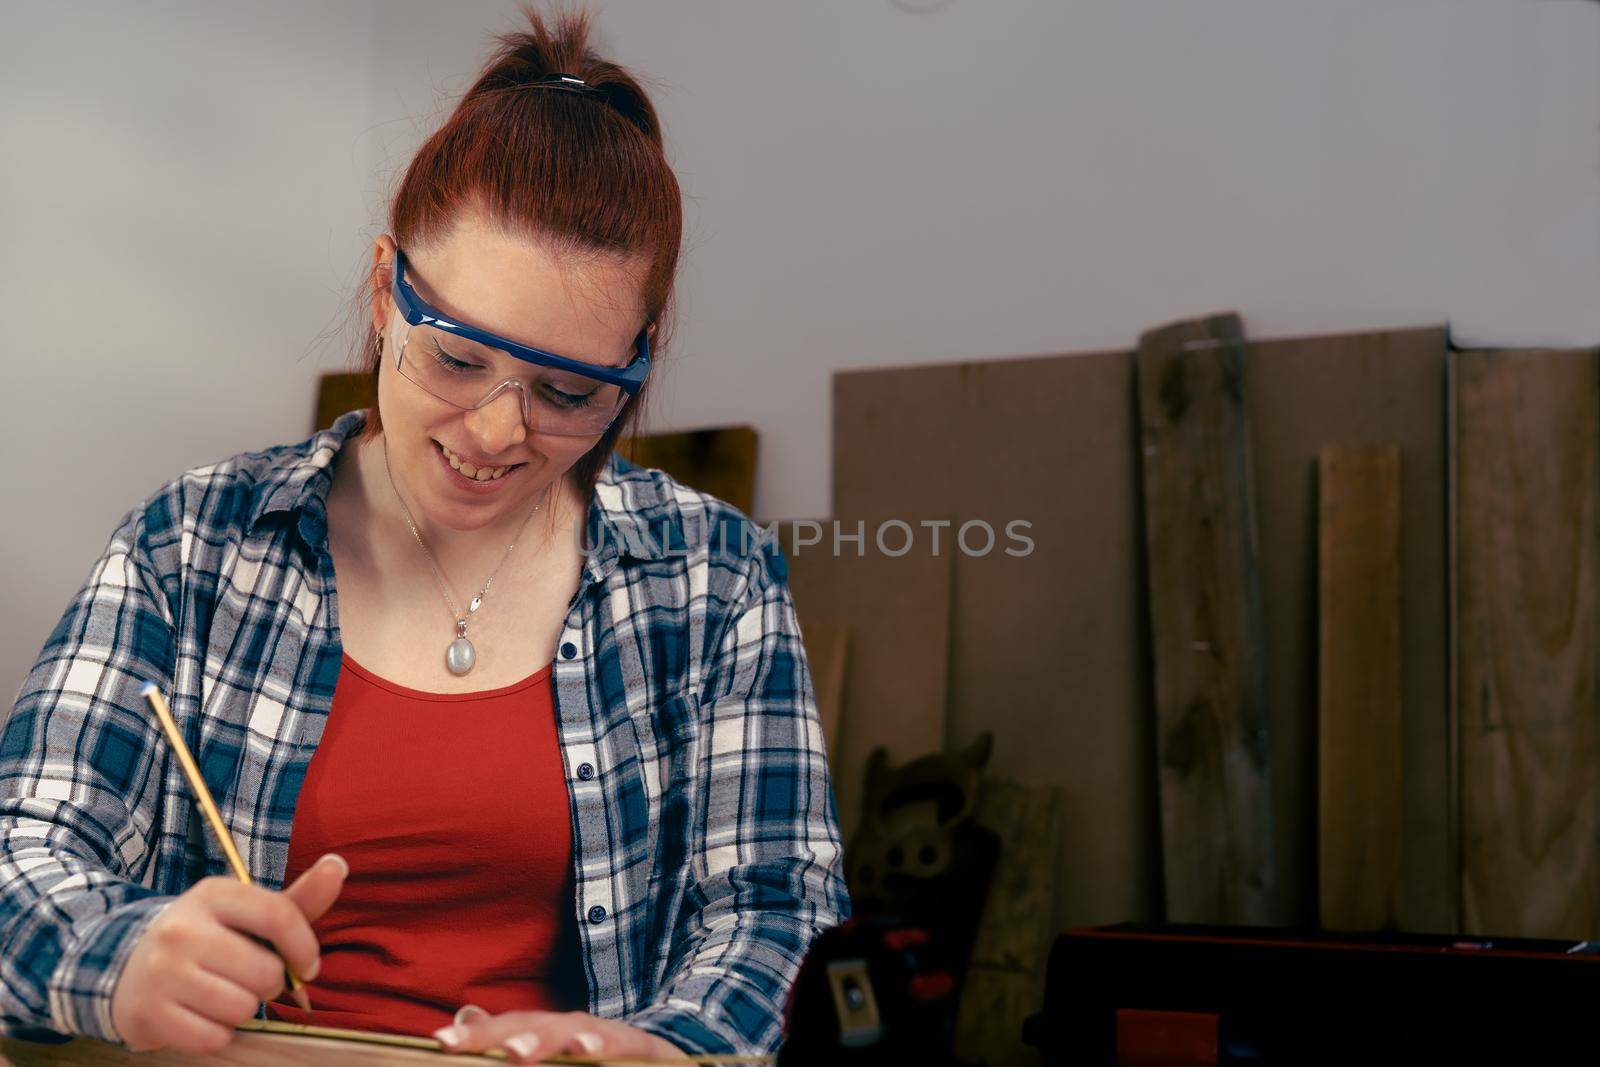 Young woman carpenter smilling, with red hair, working on wood design in a small carpentry workshop, dressed in blue checked shirt and red t-shirt. Young businesswoman handcrafting a piece of wood in her small business. Warm light indoors, background with wooden slats. Horizntal.